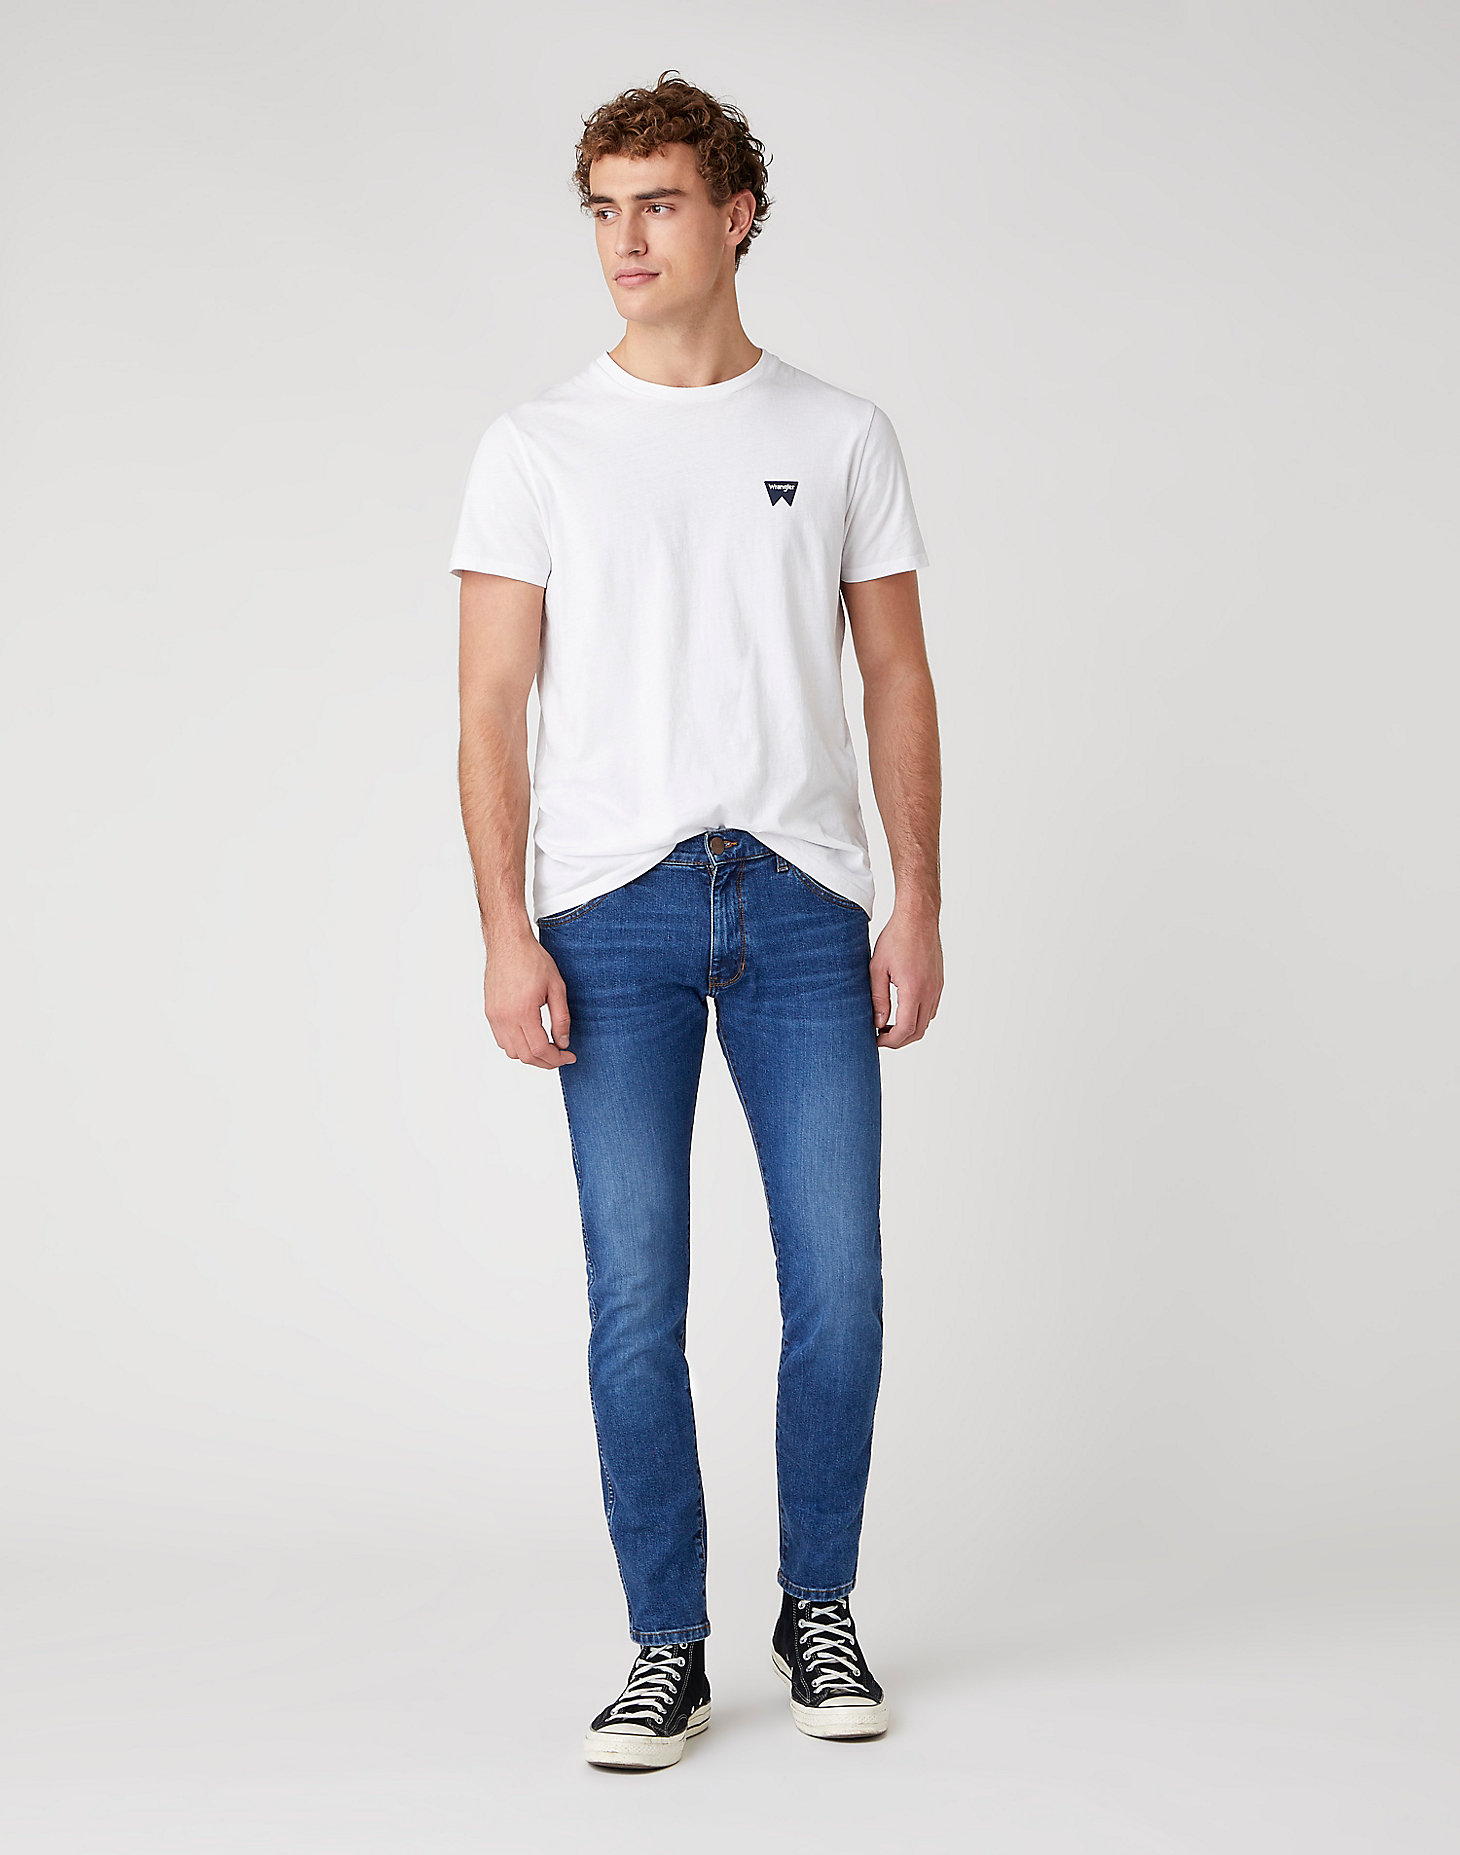 Sign Off Tee in White alternative view 4